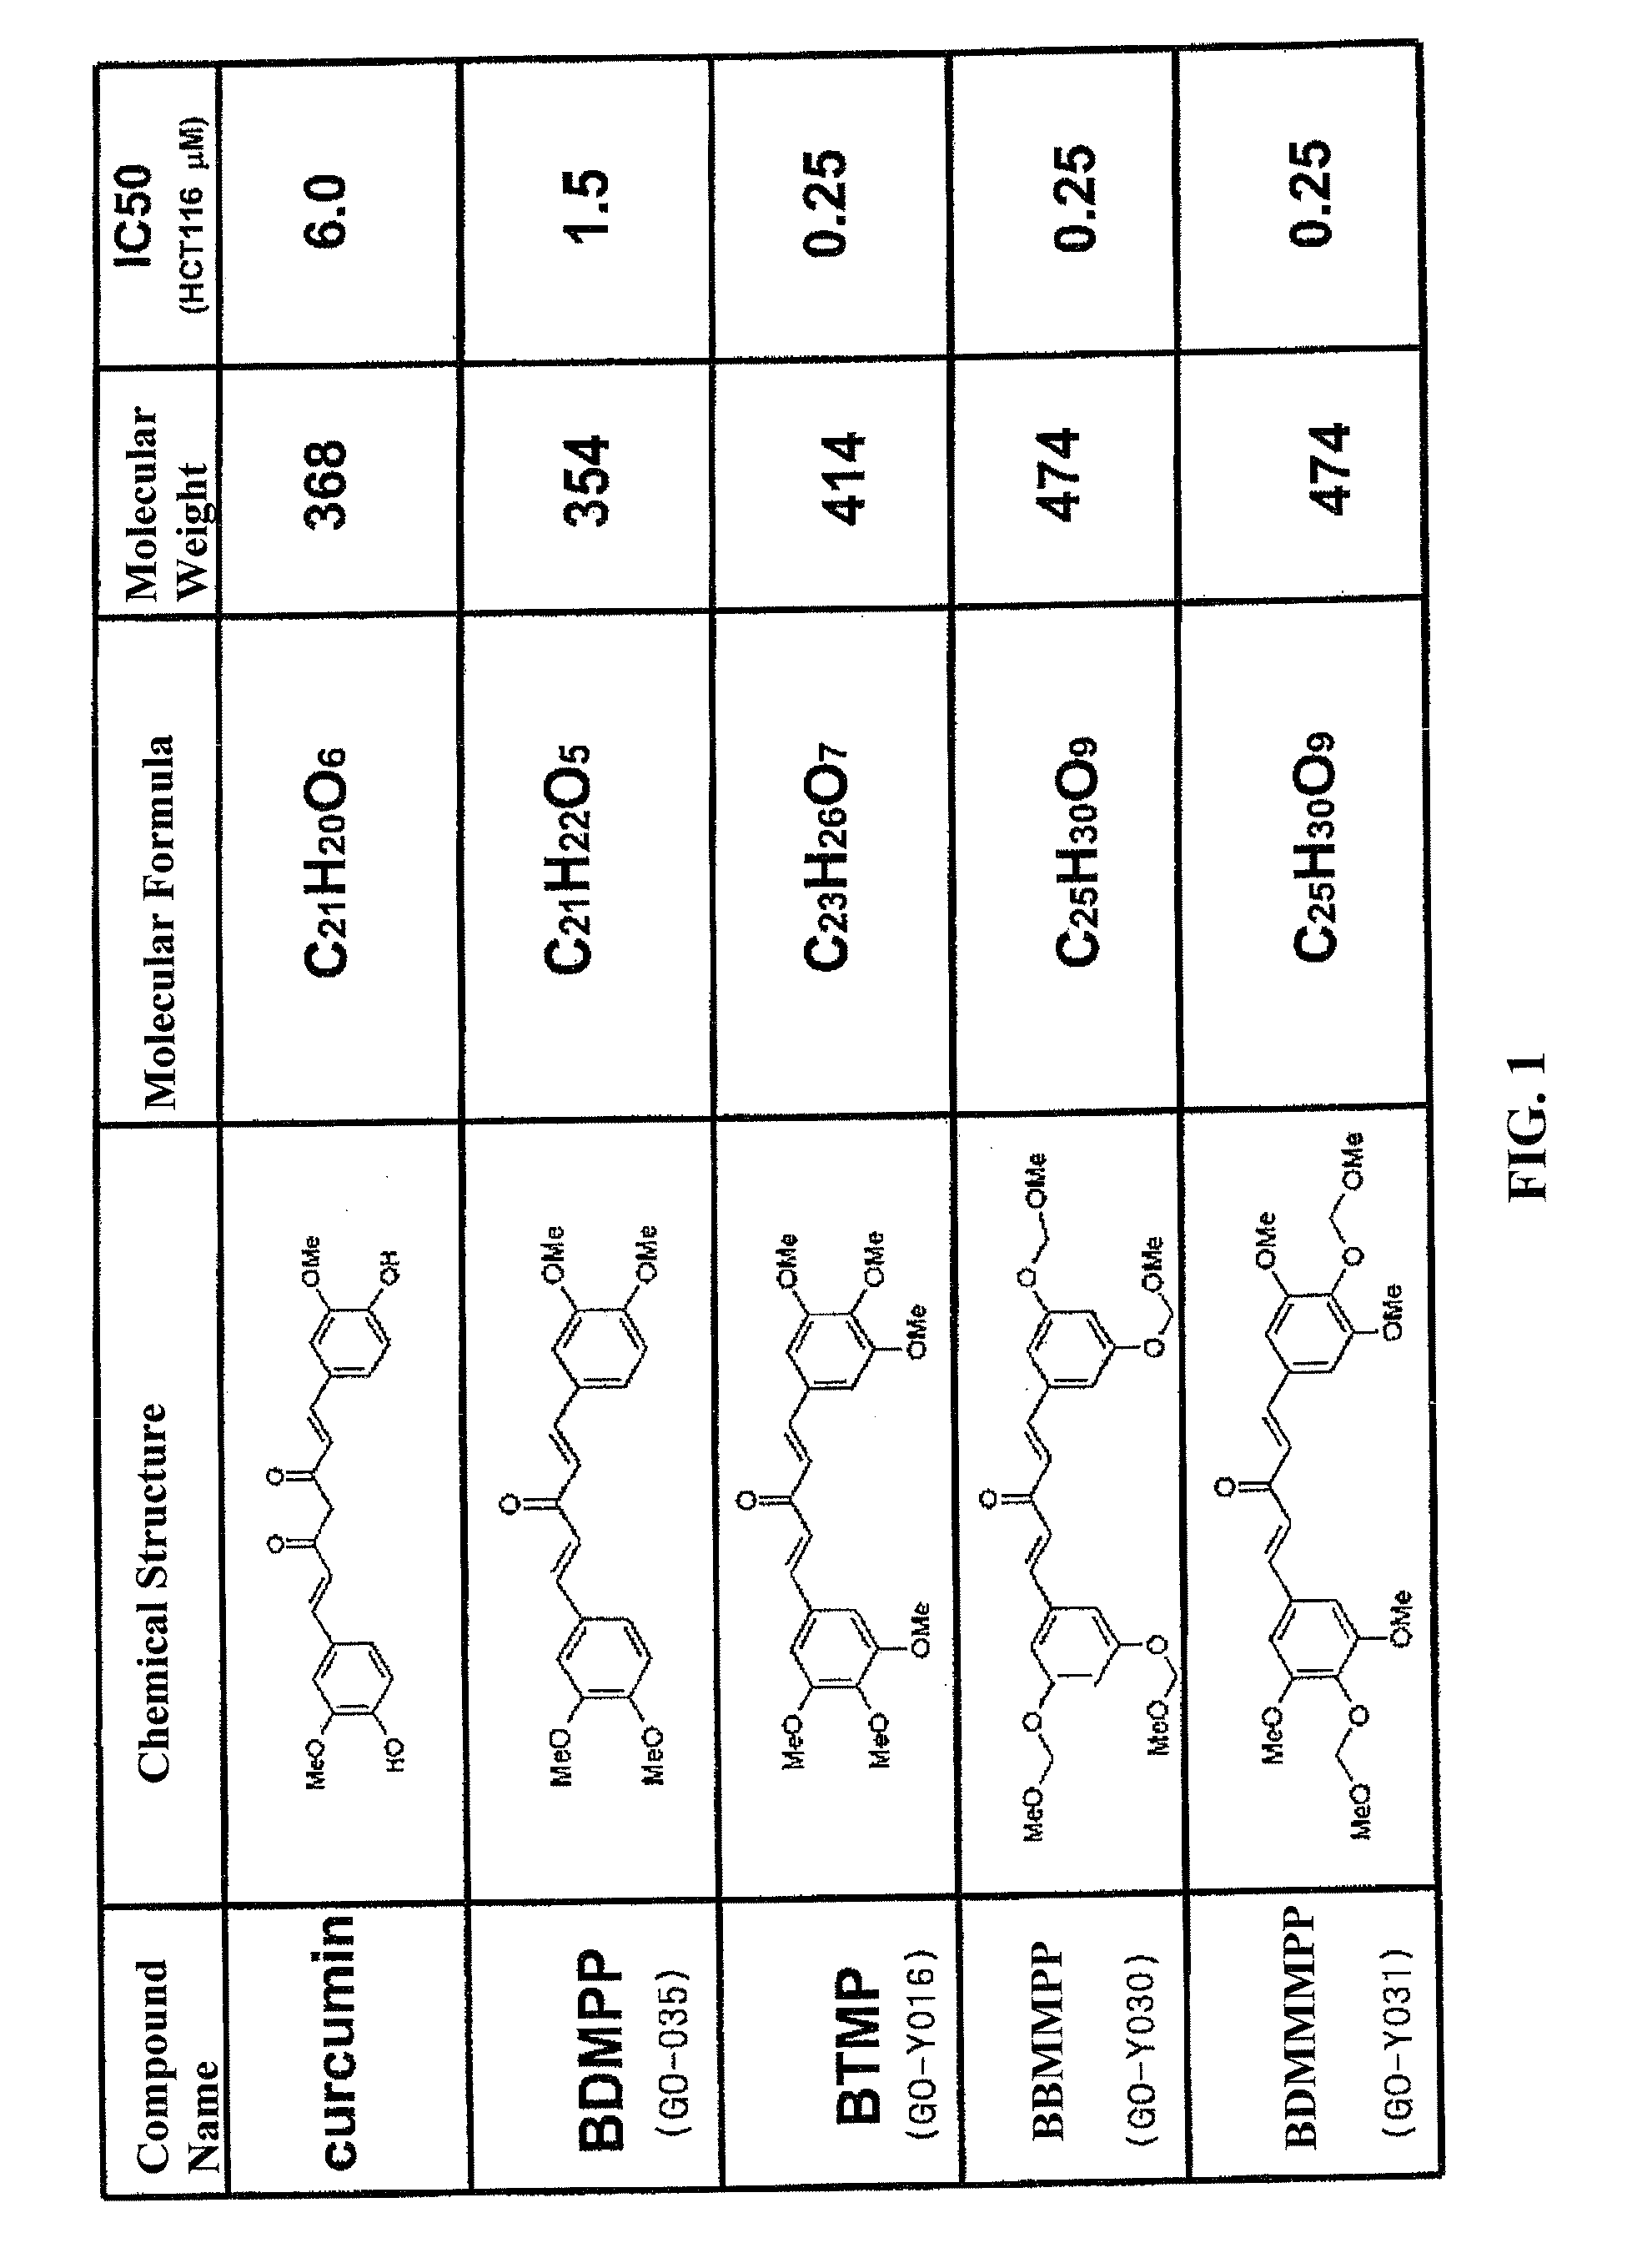 BIS(ARYLMETHYLIDENE)ACETONE COMPOUND, ANTI-CANCER AGENT, CARCINOGENESIS-PREVENTIVE AGENT, INHIBITOR OF EXPRESSION OF Ki-Ras, ErbB2, c-Myc AND CYCLINE D1, BETA-CATENIN-DEGRADING AGENT, AND p53 EXPRESSION ENHANCER